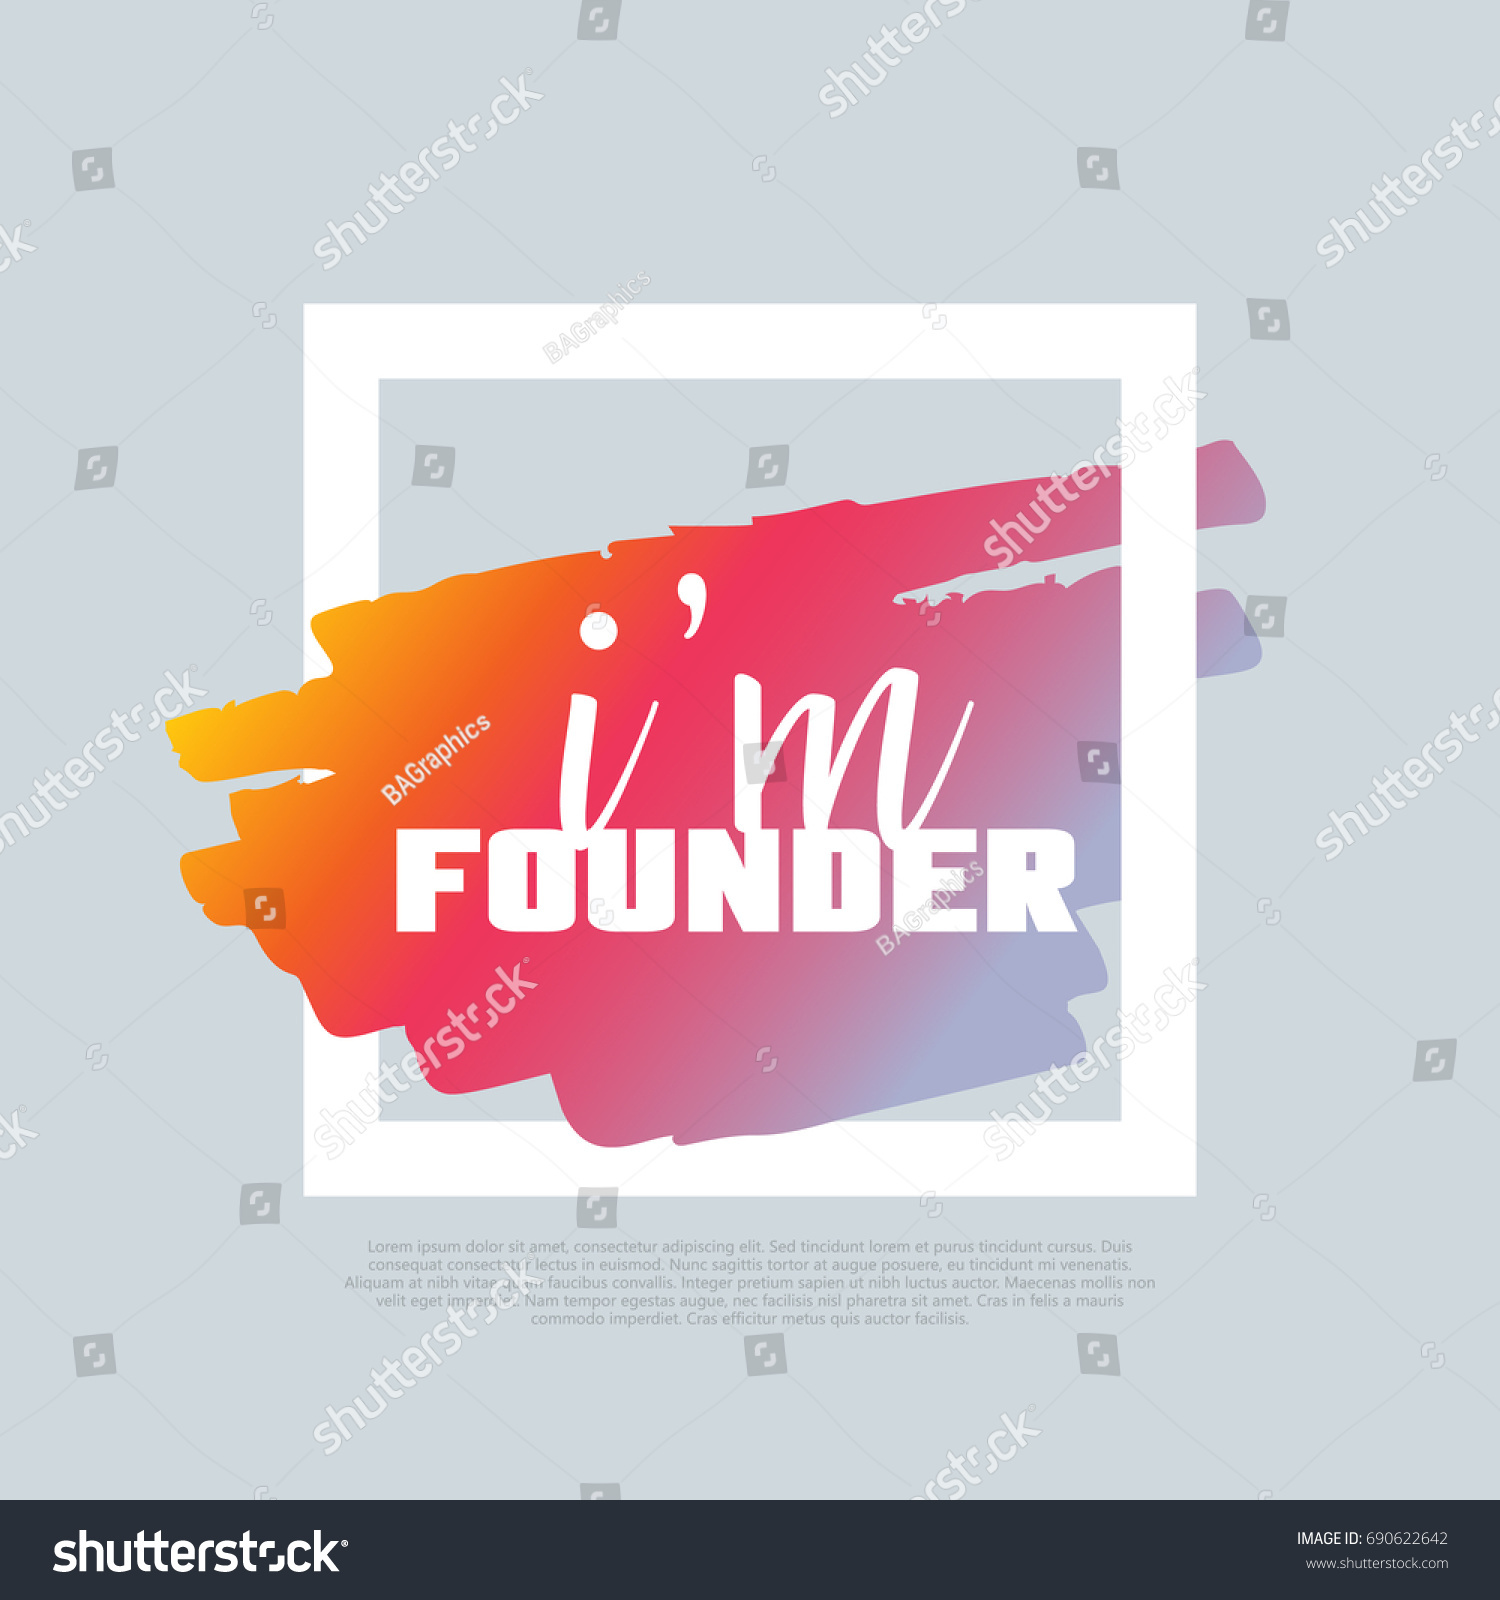 SVG of I'm Founder. Vector clip-art template, poster design. Motto, label, text. Compatible wtih PNG, JPG, AI, CDR, SVG, PDF and EPS. svg